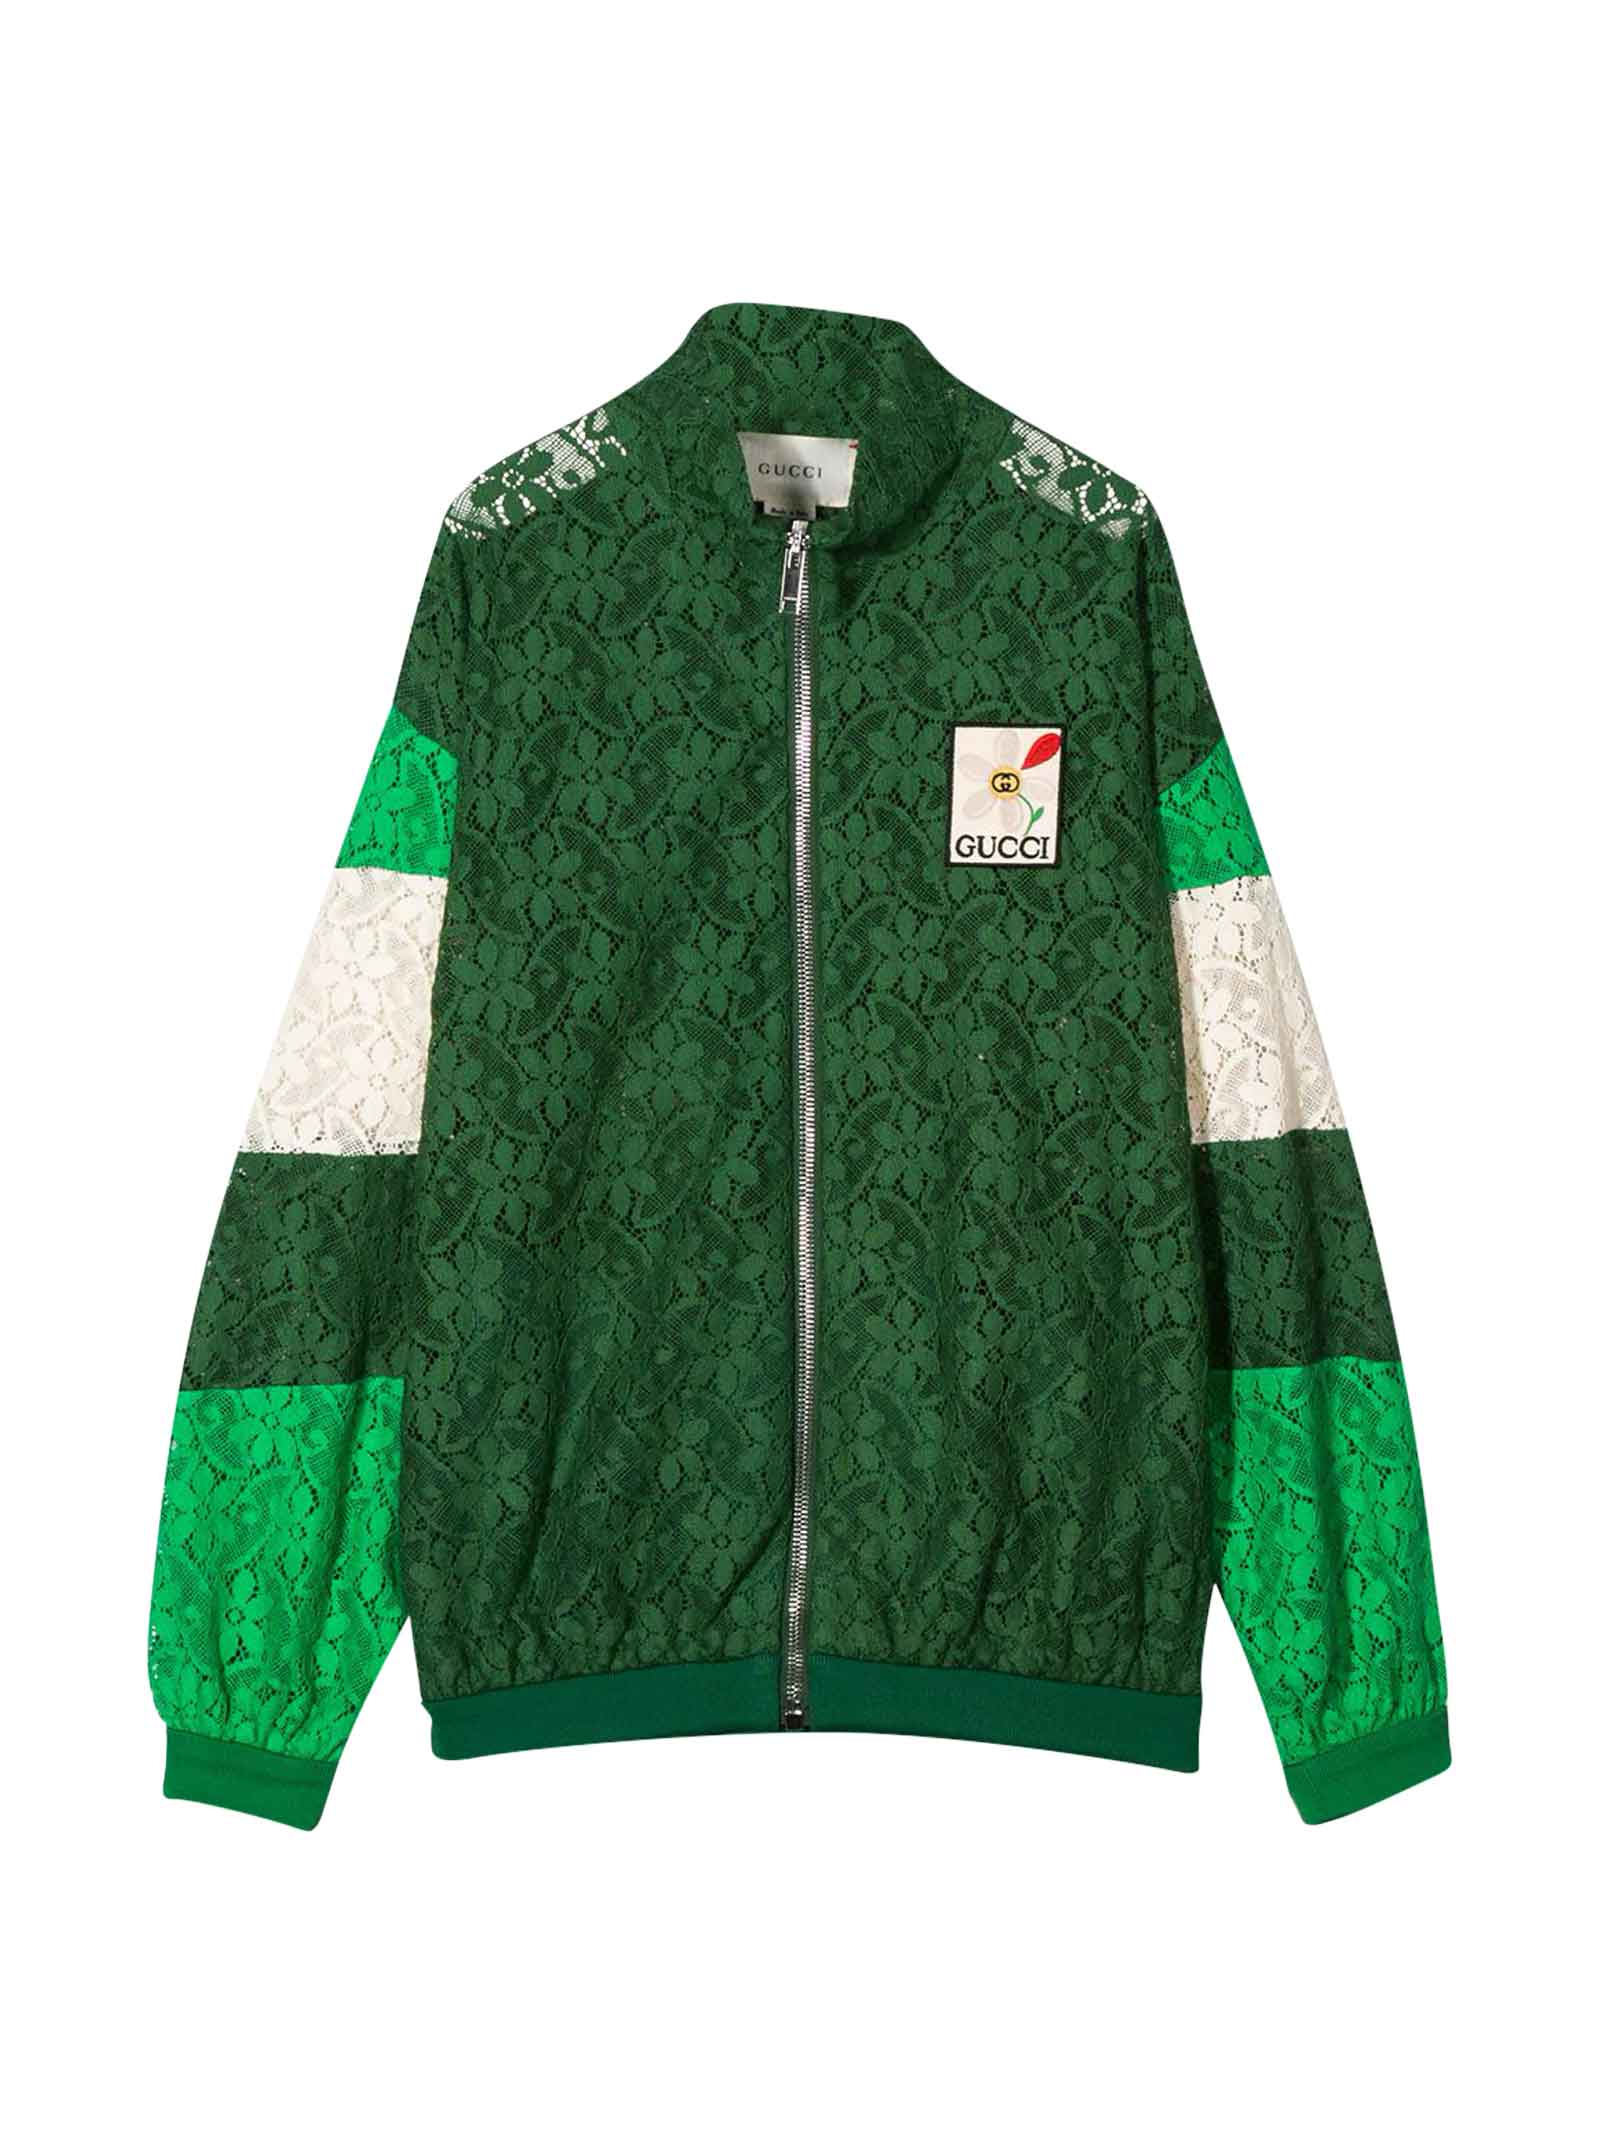 GUCCI GREEN BOMBER JACKET WITH FLOWERS DESIGN,595406ZADK1 3105